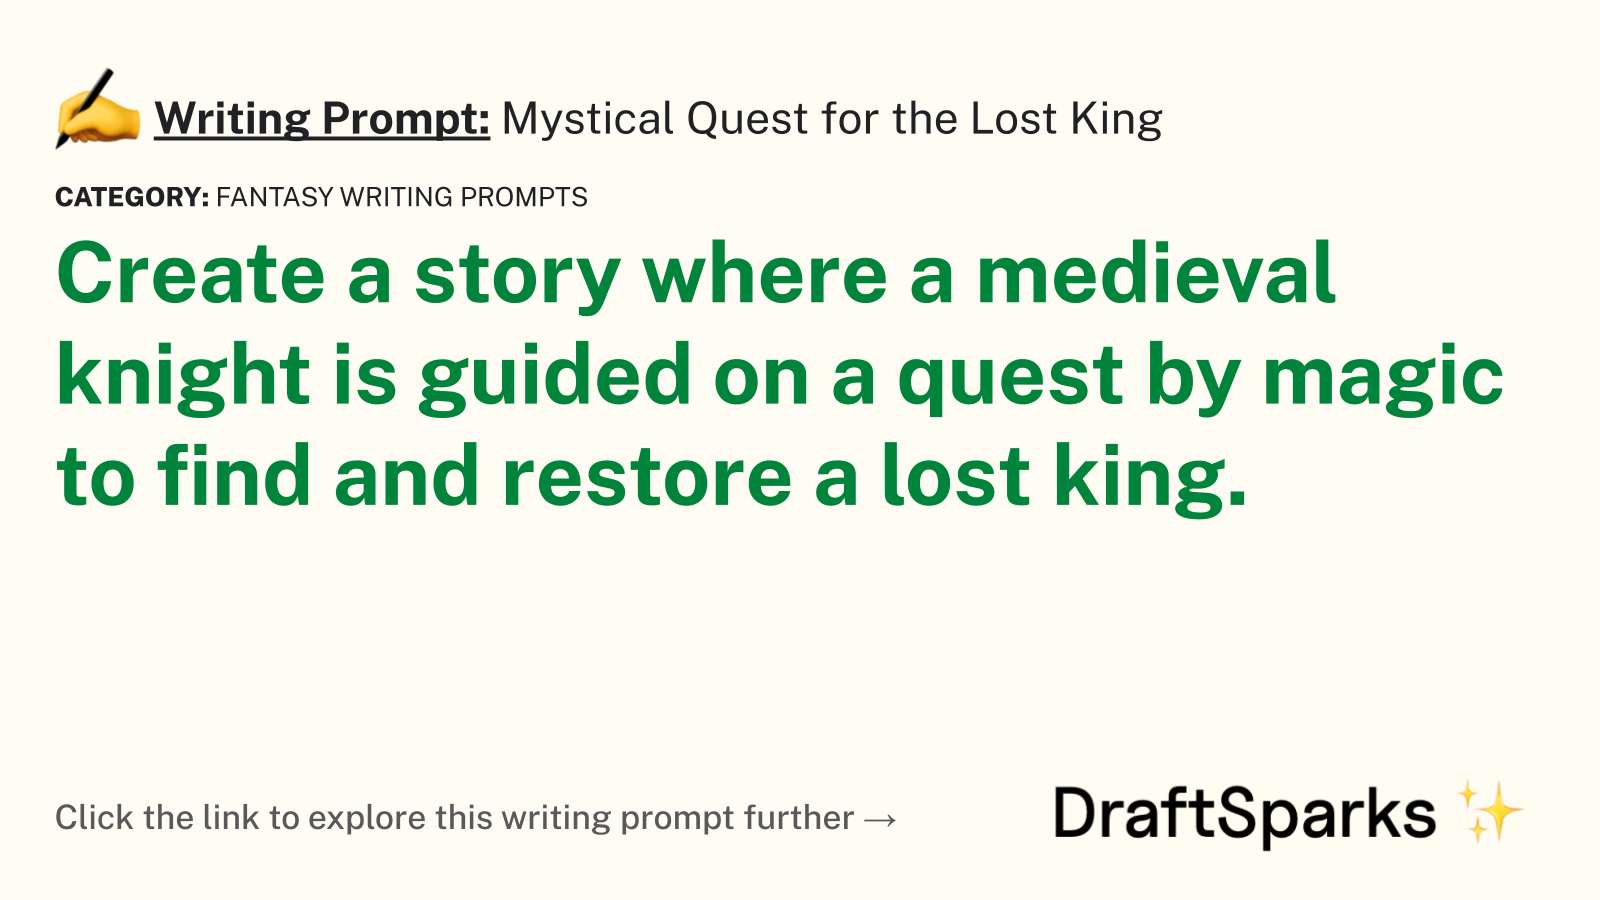 Mystical Quest for the Lost King